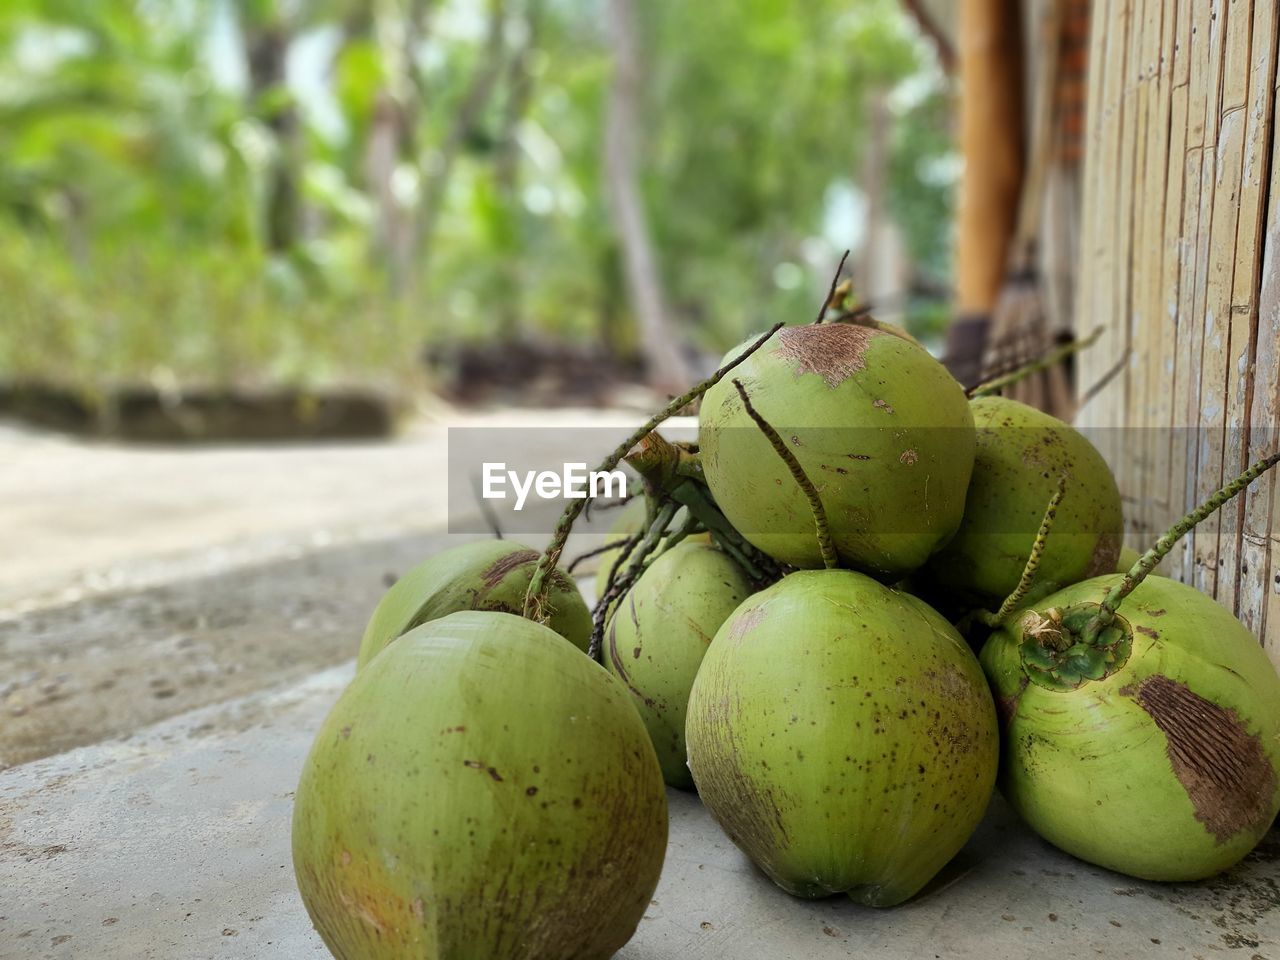 food, food and drink, healthy eating, fruit, wellbeing, freshness, produce, green, plant, tropical fruit, no people, coconut, focus on foreground, nature, day, outdoors, tree, close-up, social issues, tropical climate